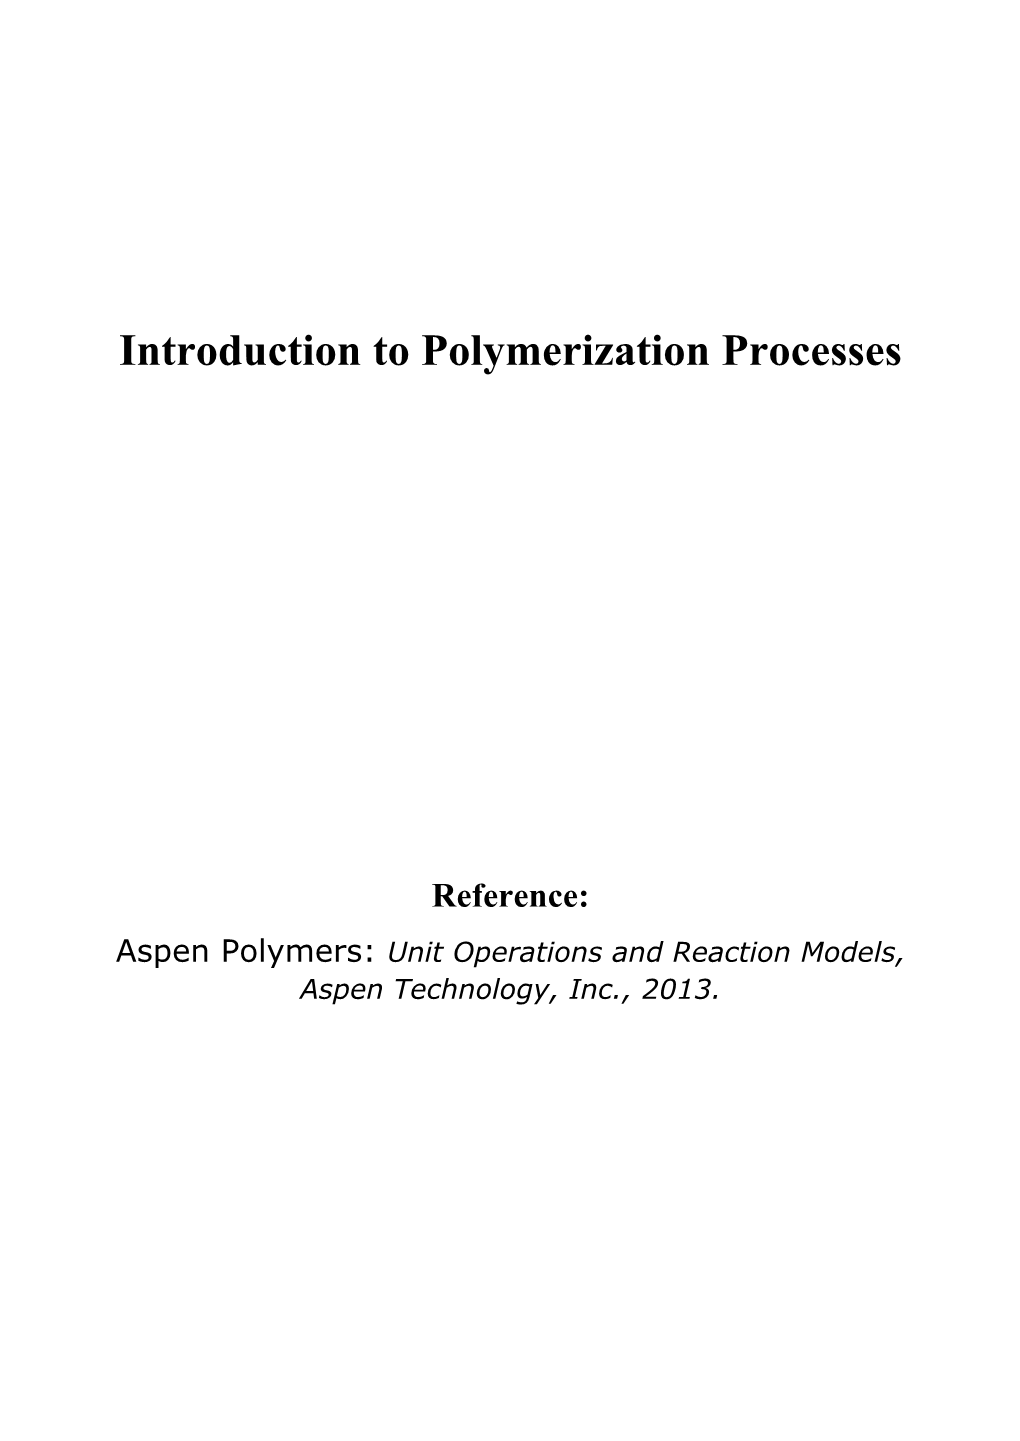 Introduction to Polymerization Processes